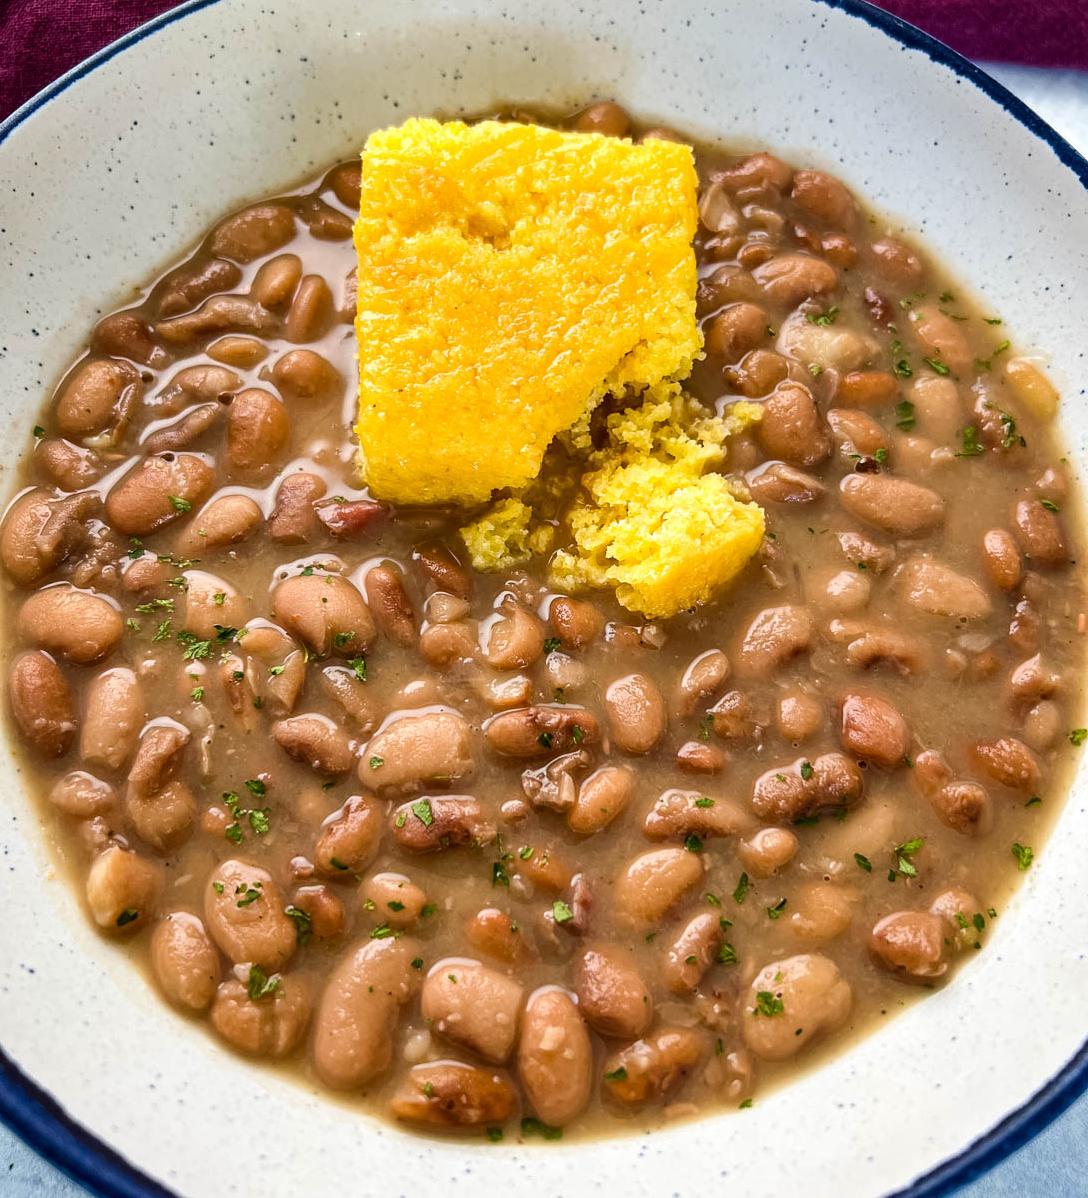  The perfect side dish for any Southern feast – salted pinto beans that are sure to steal the show.